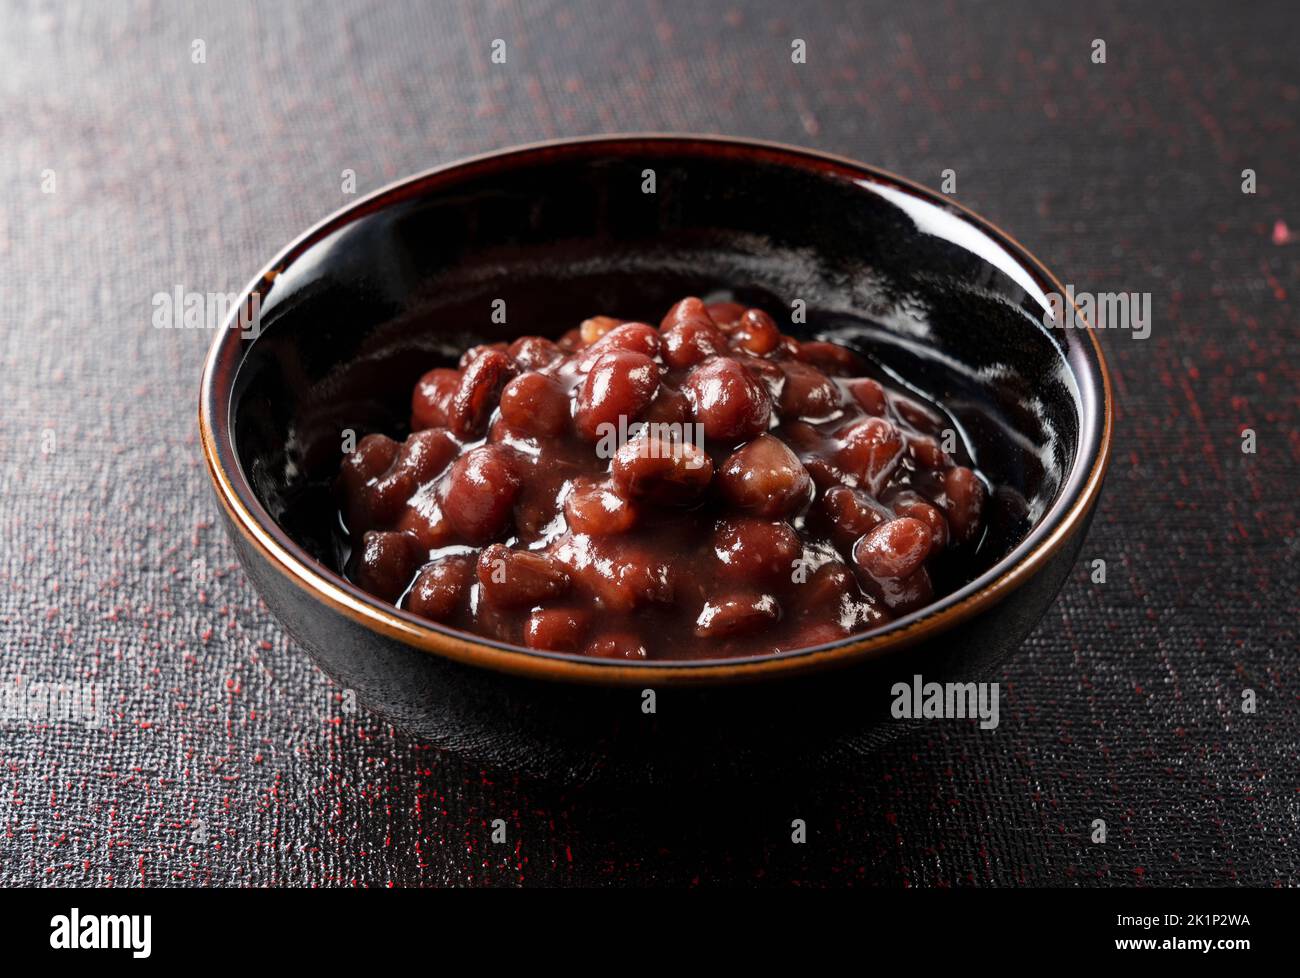 Boiled azuki beans in a small black bowl placed against a black background. Stock Photo